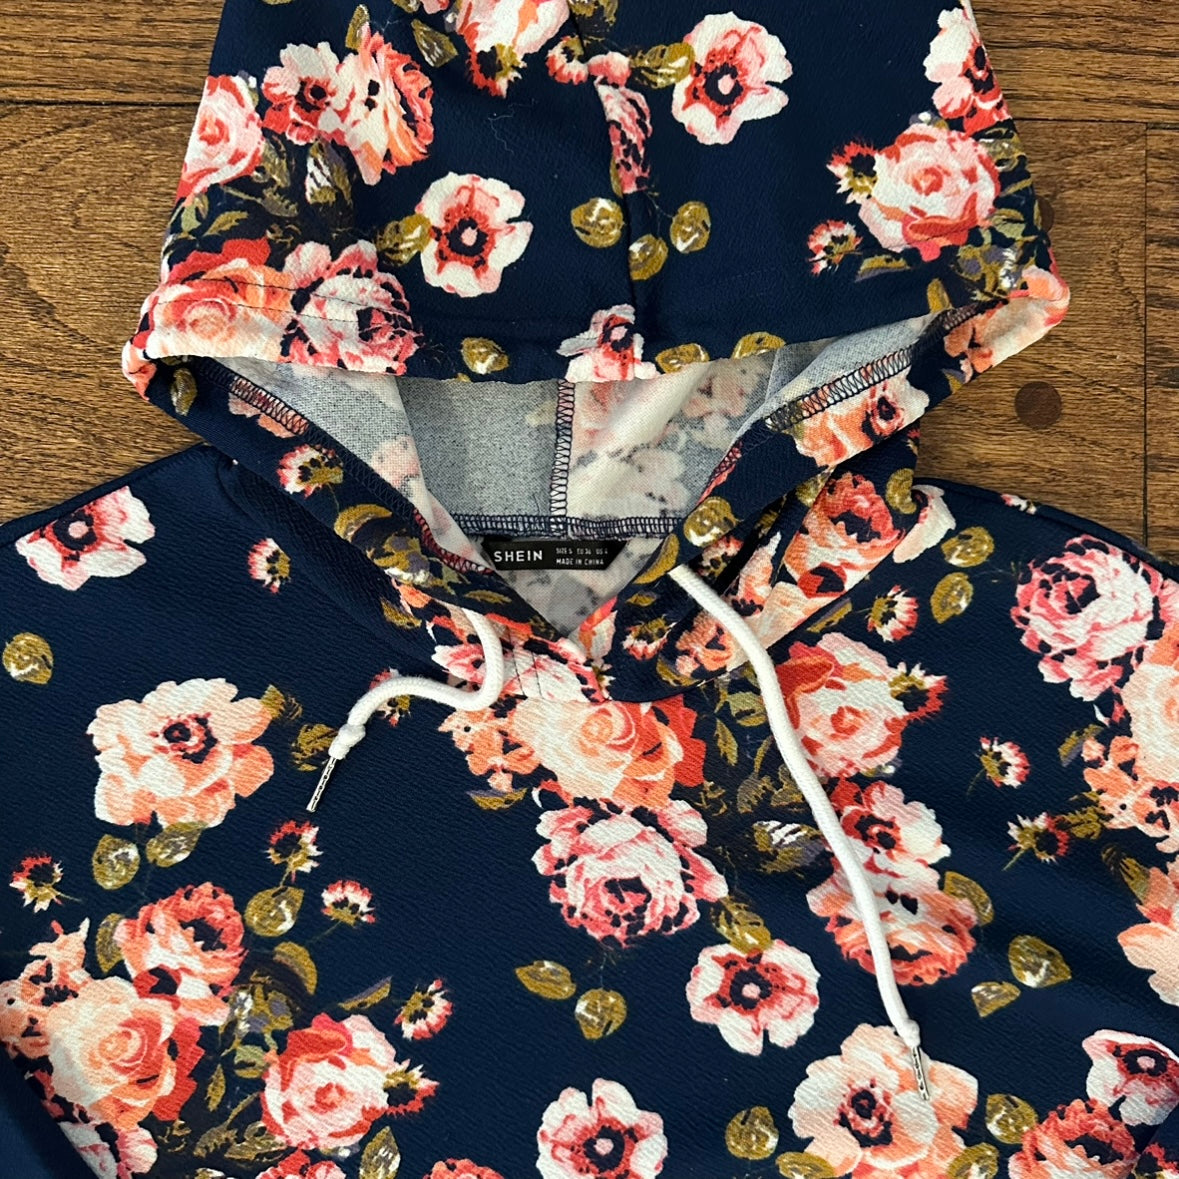 Women's SHEIN Navy Pink Floral Maternity Hoodie - size 4